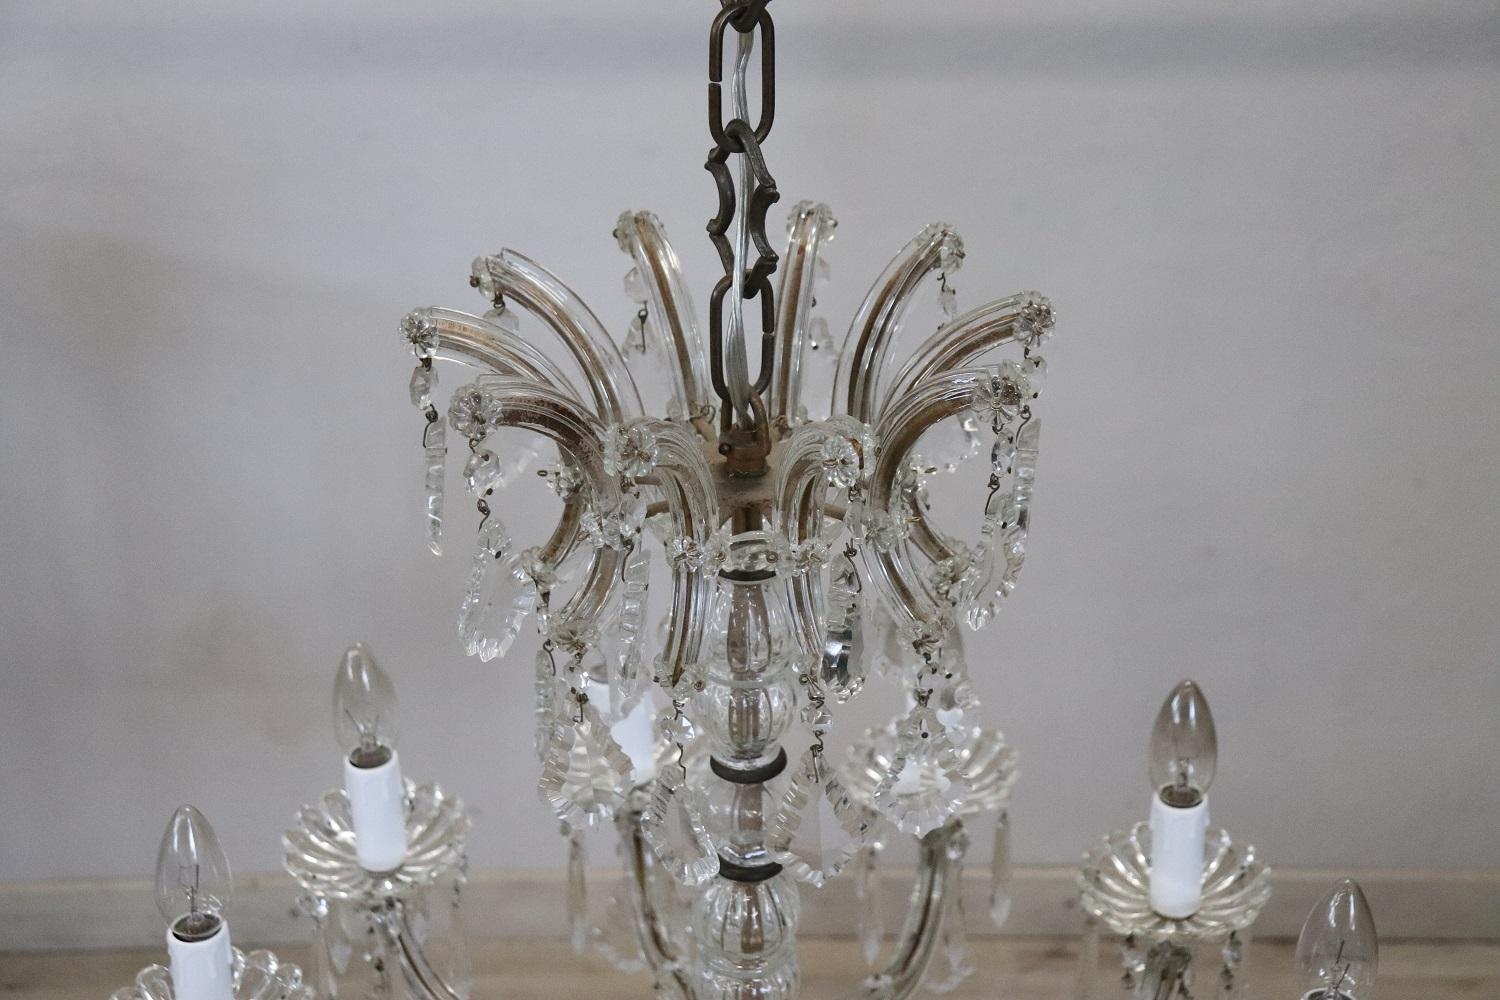 Late 19th Century 19th Century Italian Bronze and Crystals Antique Chandelier